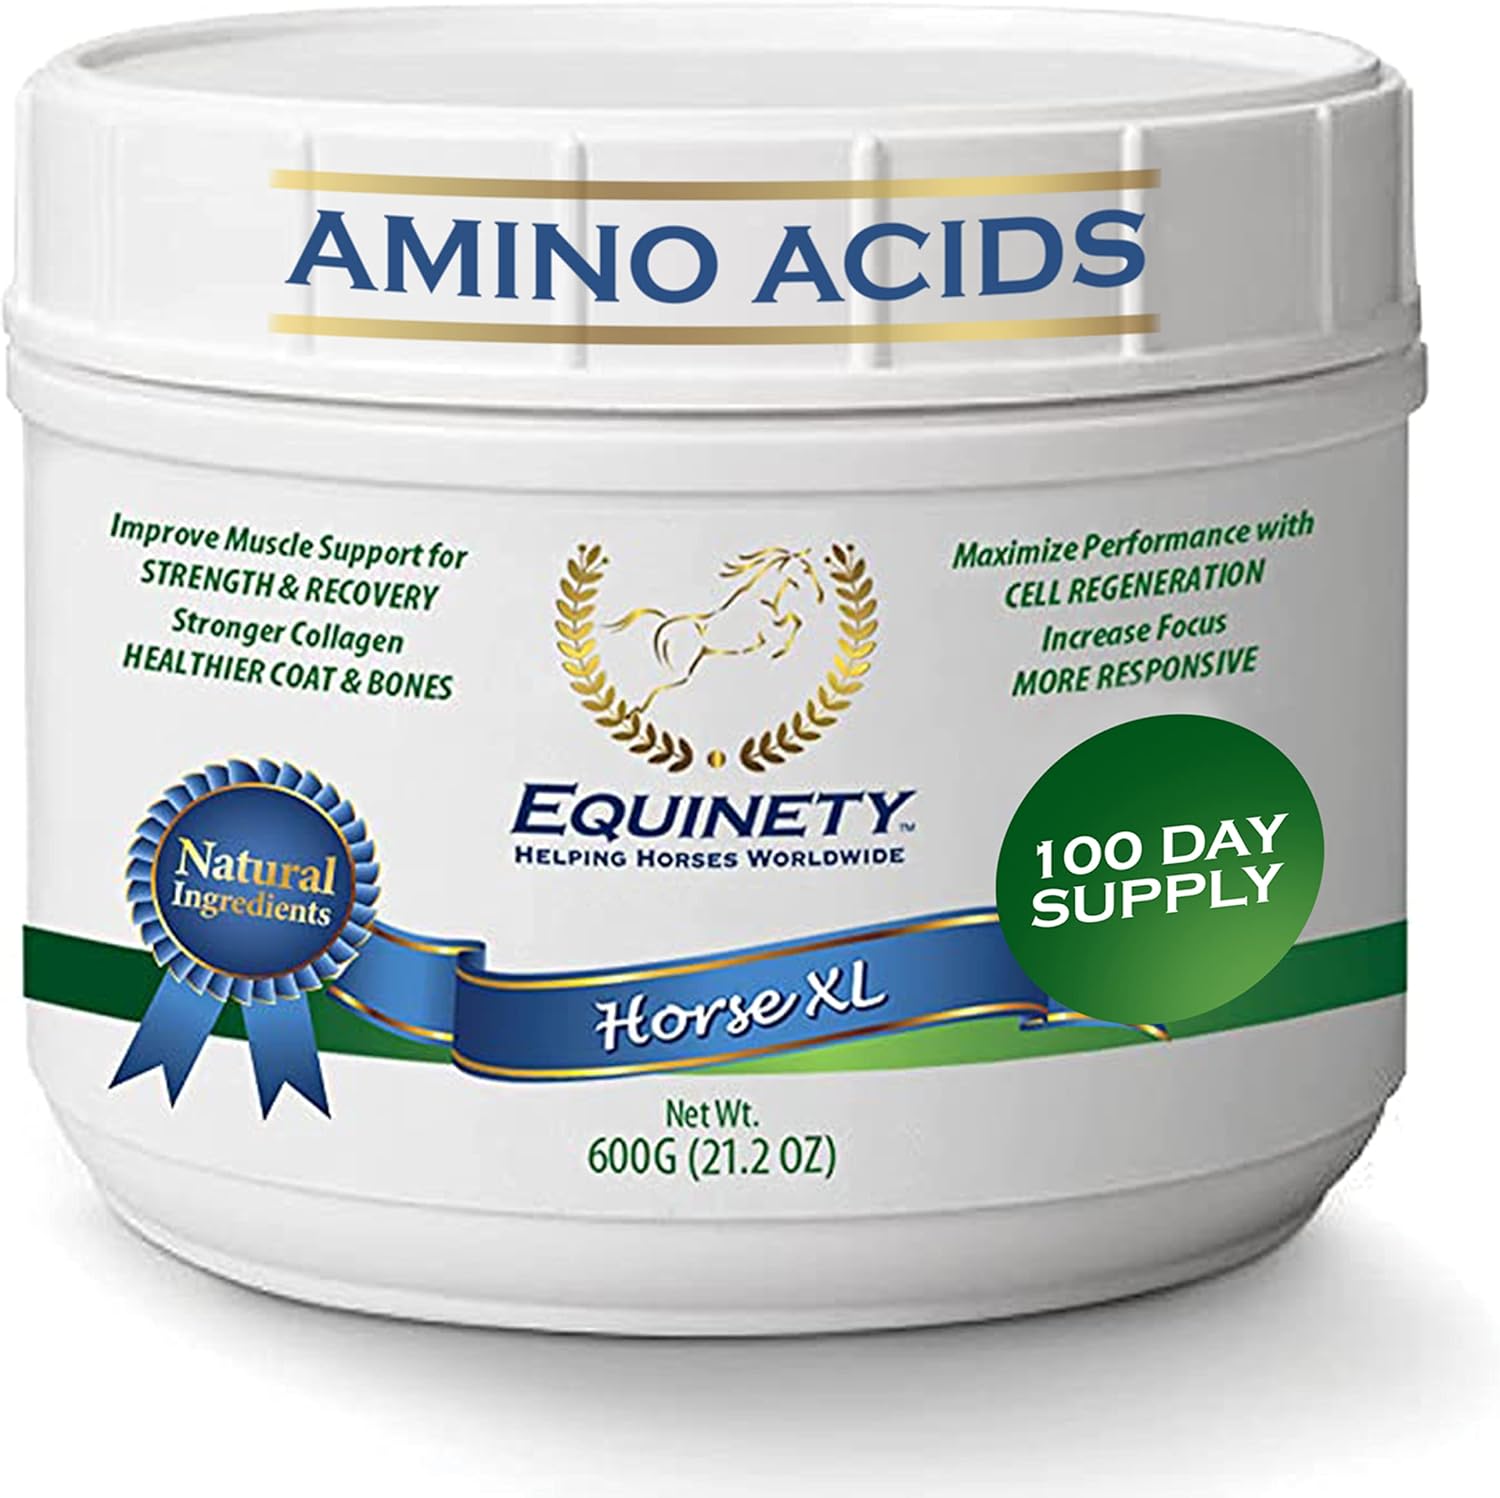 100 Day Supply Horse XL Horse Supplements – W/ 8 Essential Amino Acids for Horses to Promote Cellu